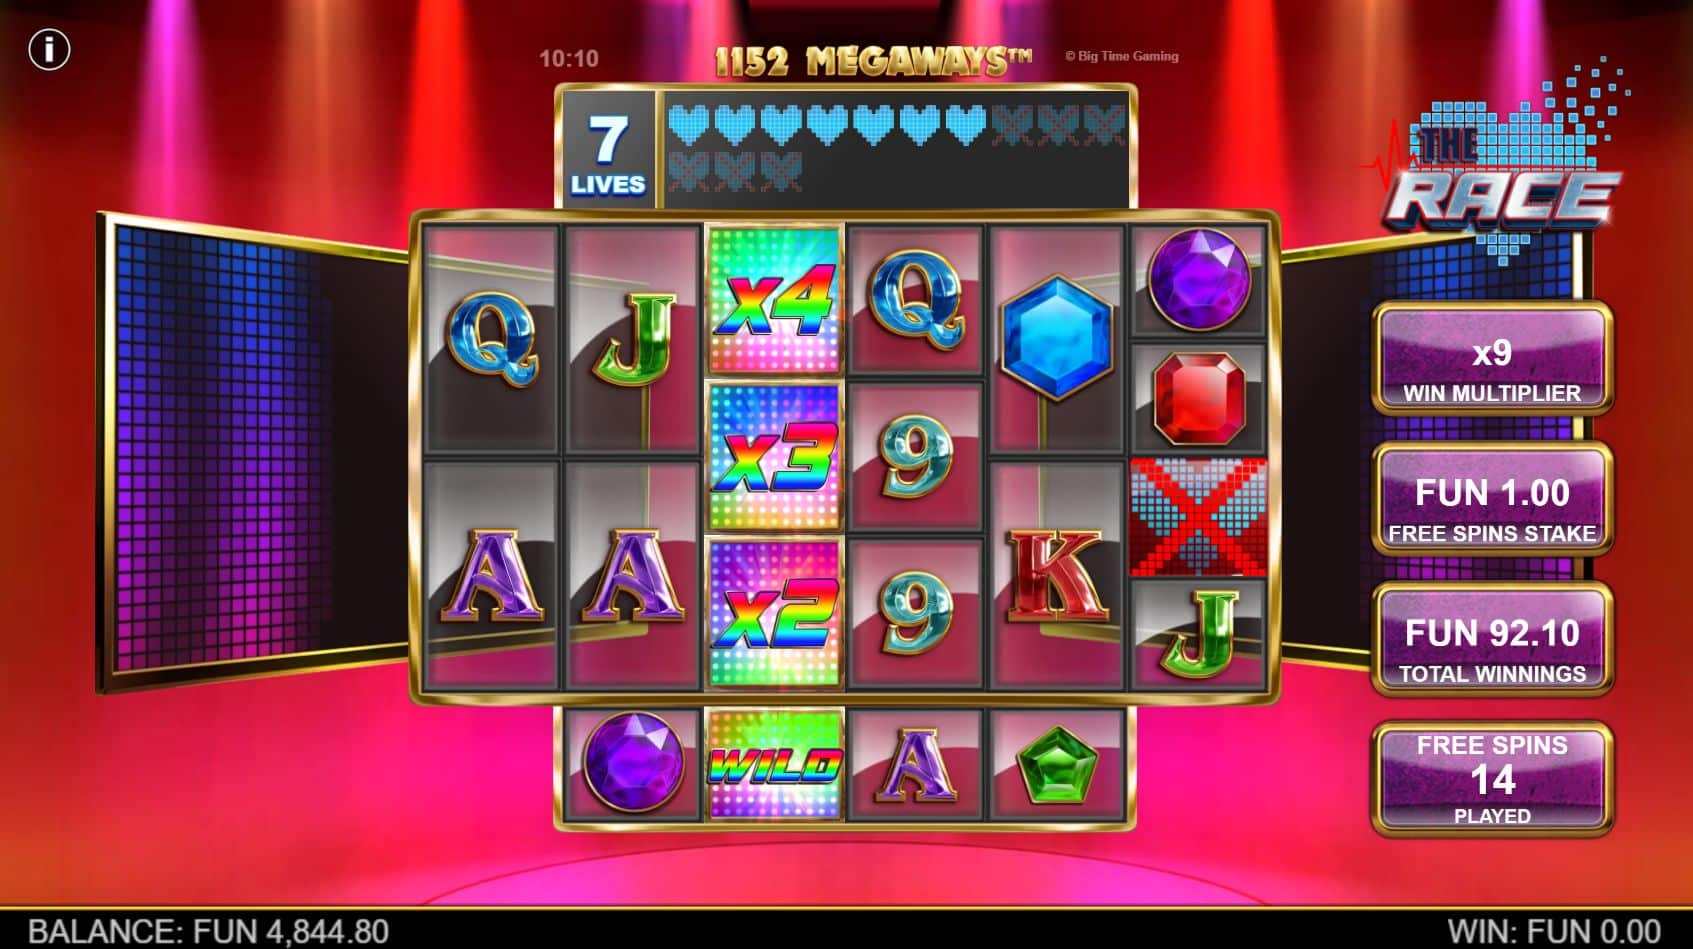 The Race Free Spins